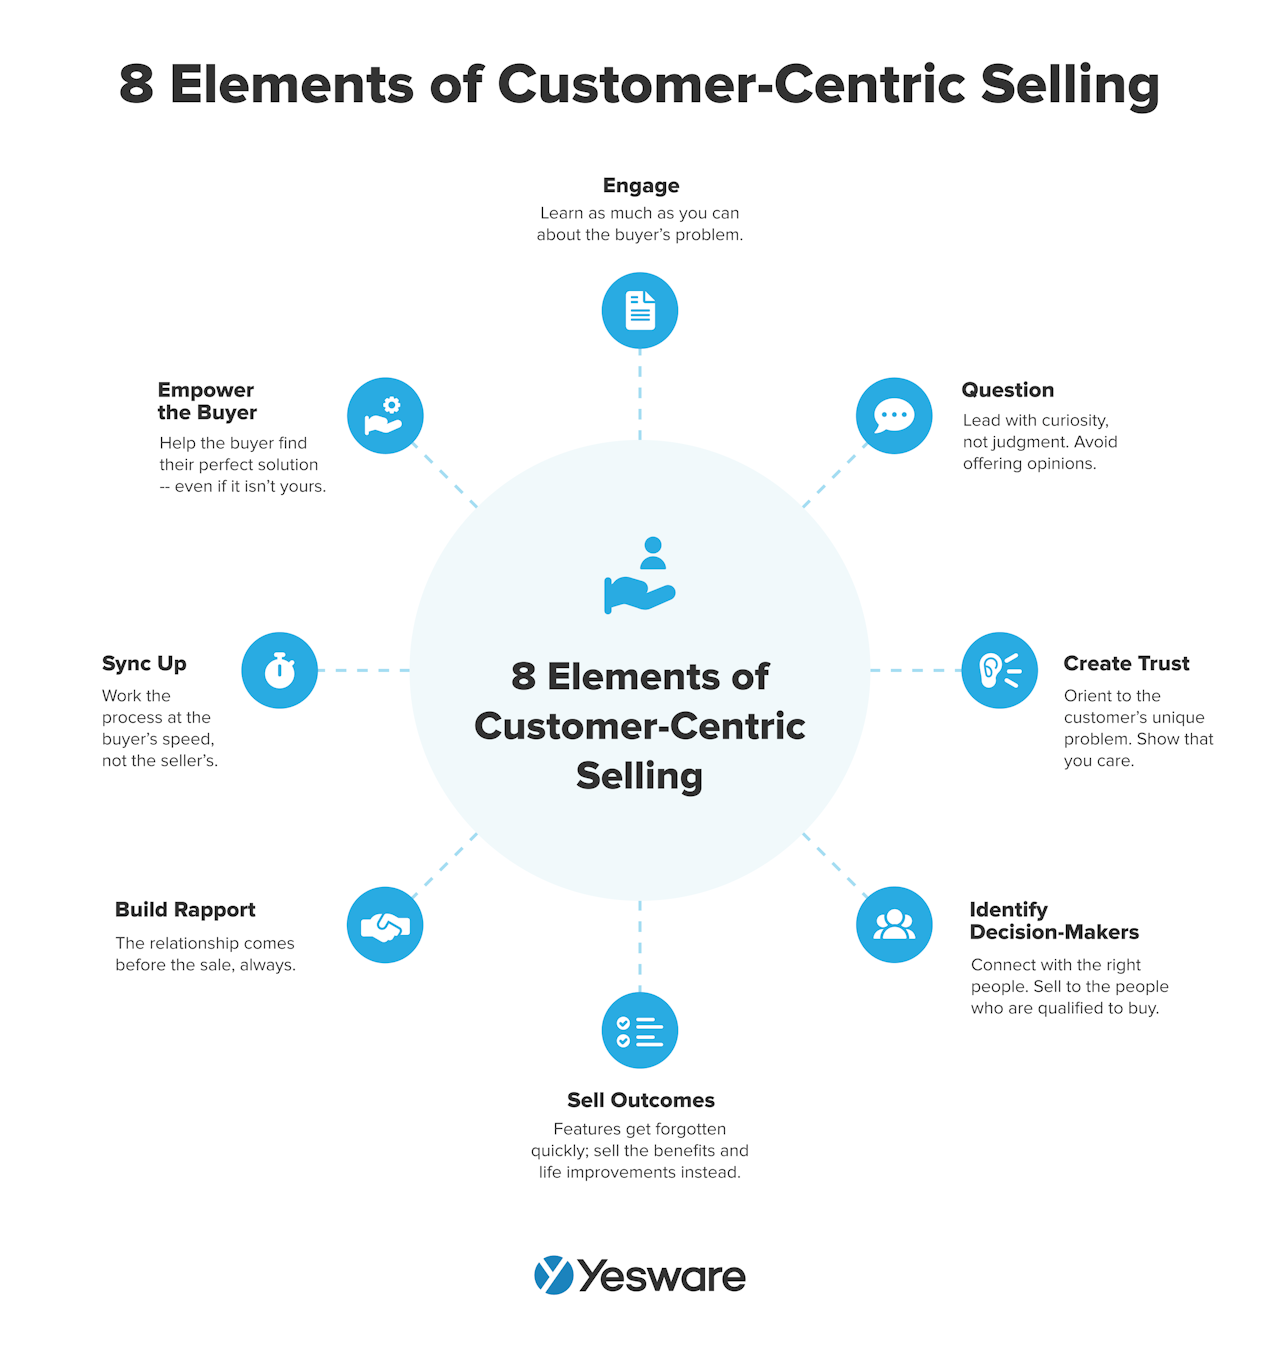 sales methodology: customer-centric selling (CCS)